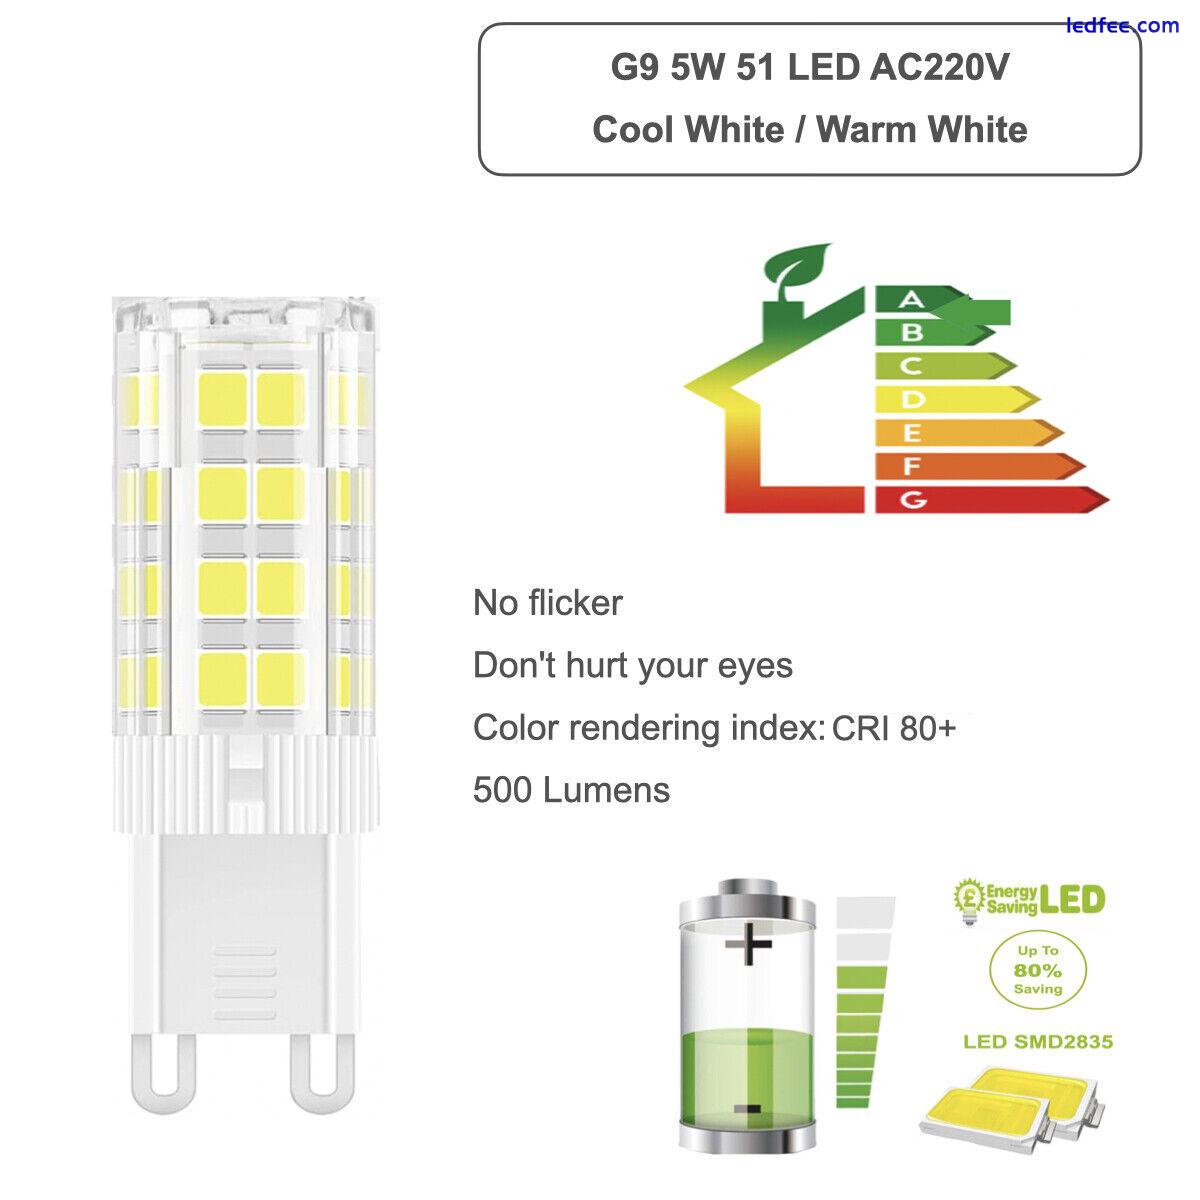 LED Light Bulbs G9 3W | 5W SMD2835 Replacement For G9 Halogen Capsule Bulbs 5 